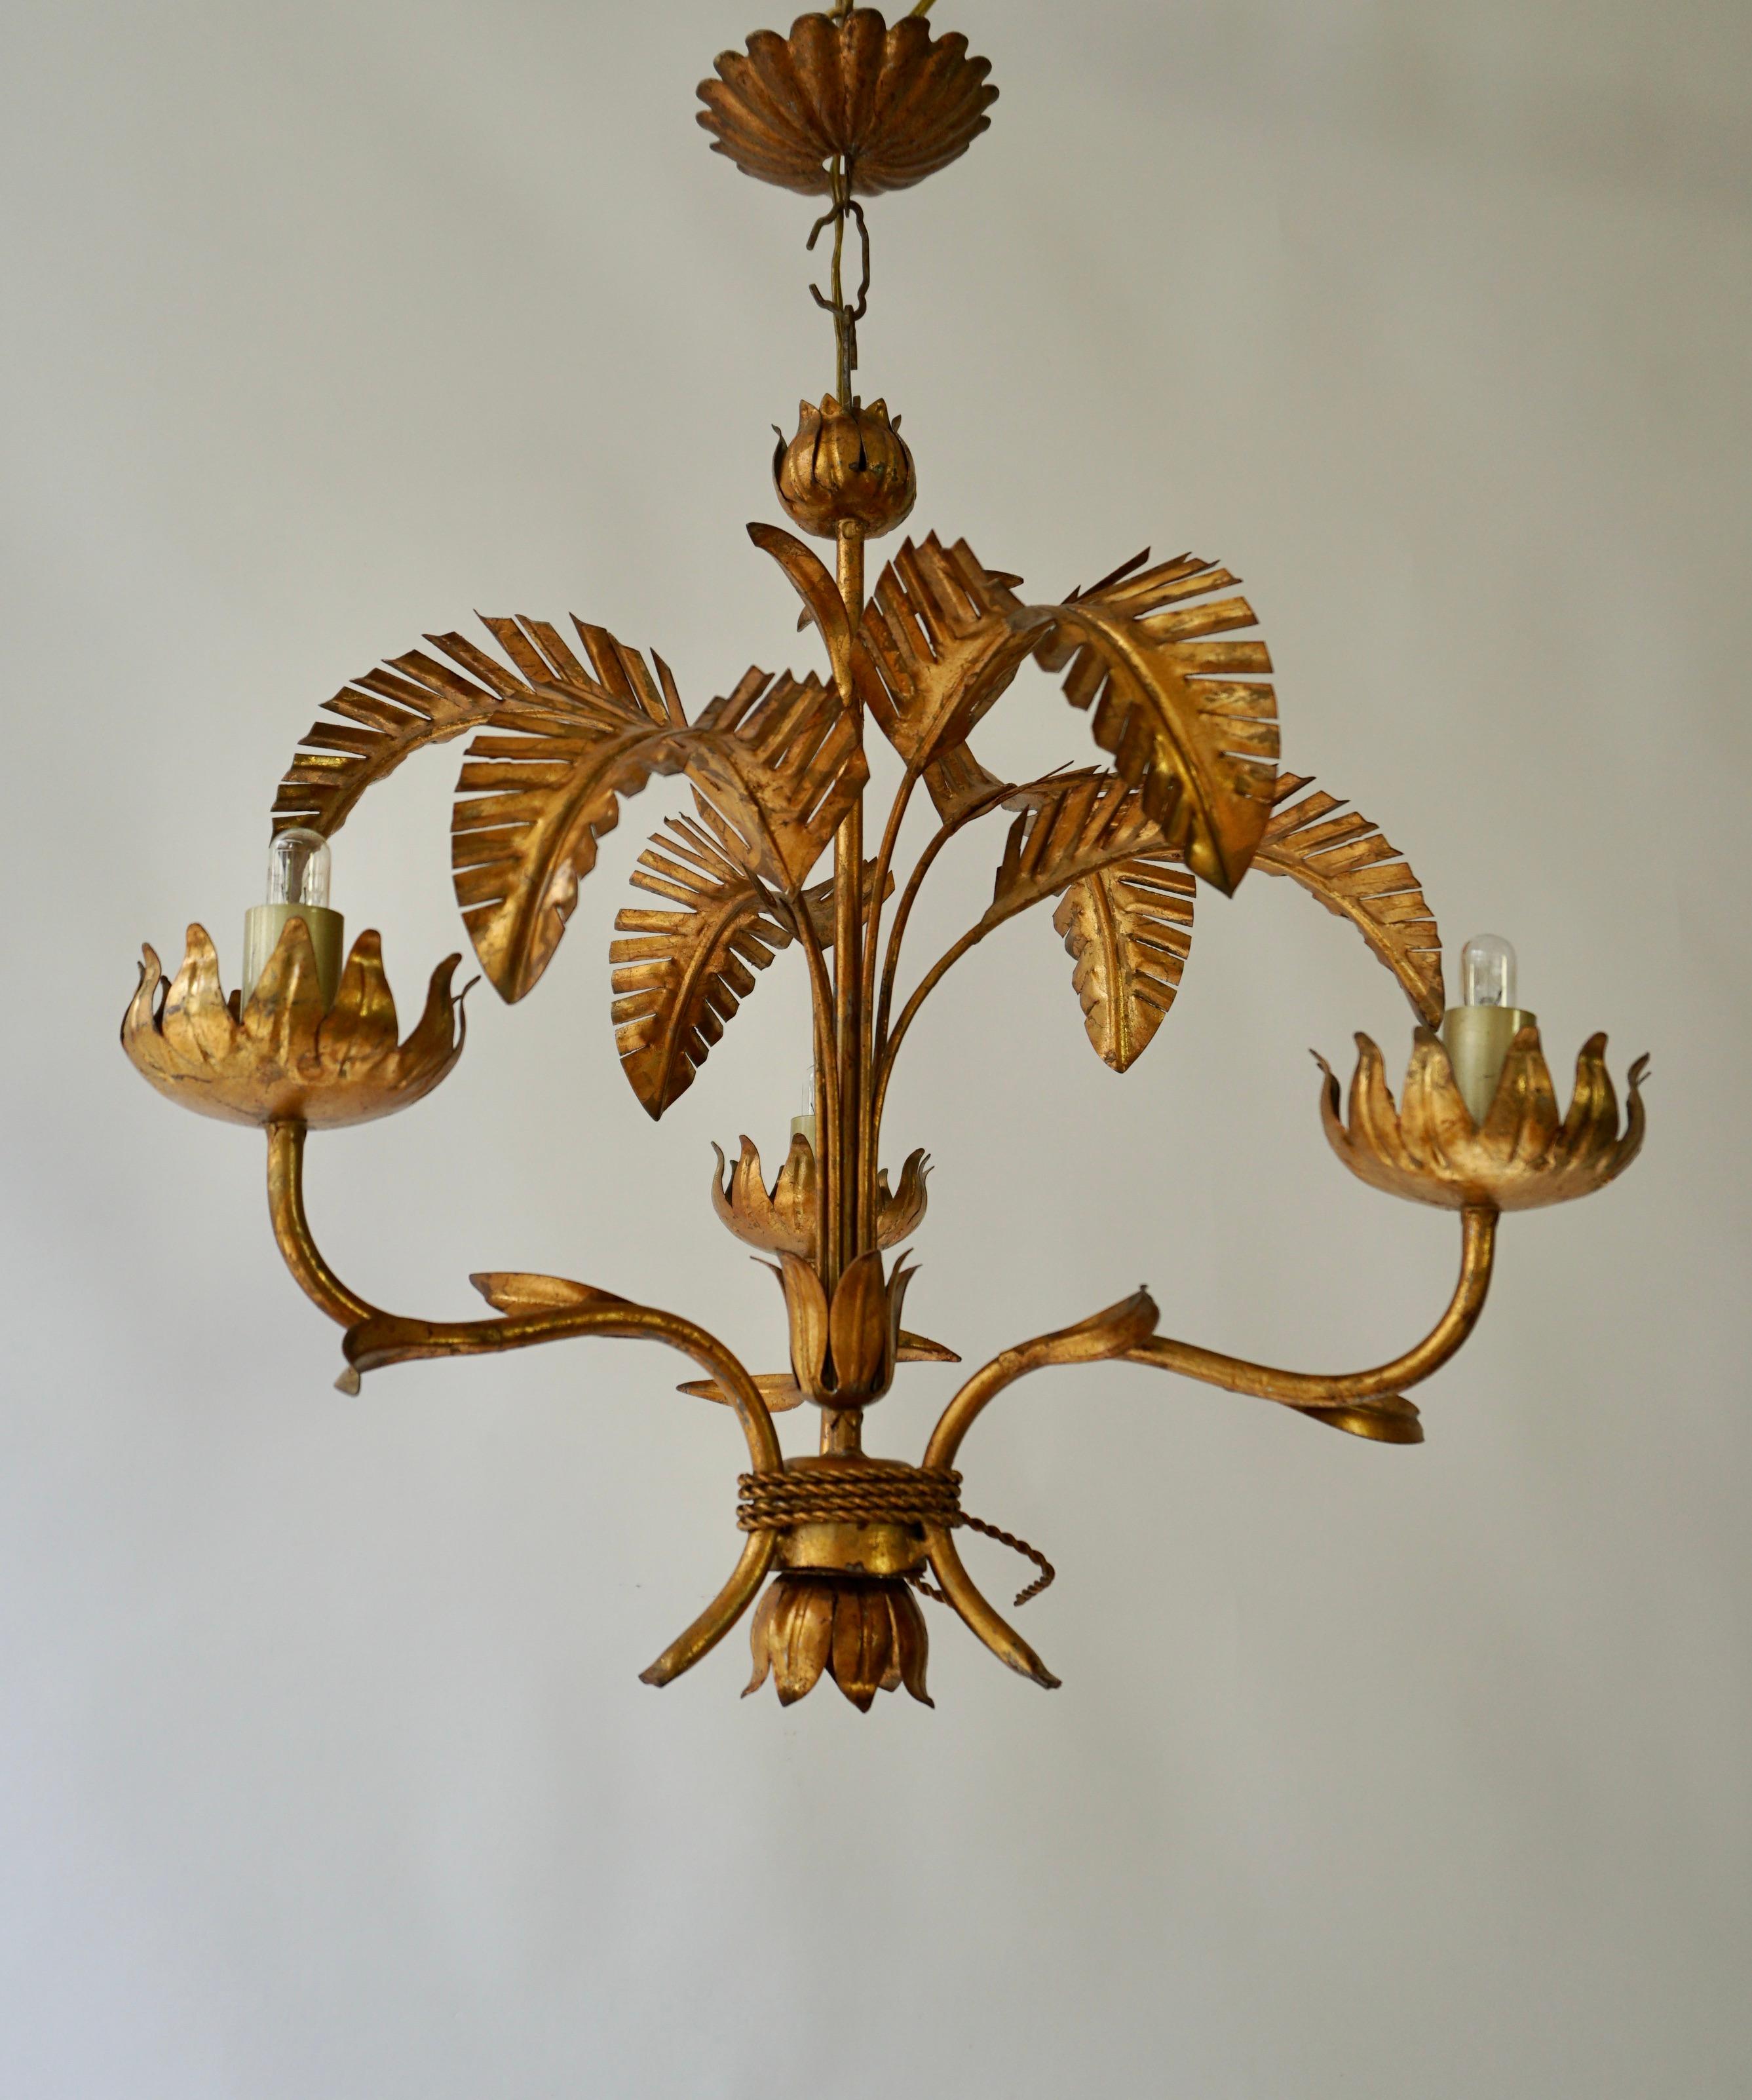 Gorgeous Italian chandeliers in the shape of  palm leaf flowers, made of gilt metal.The chandelier is hand-crafted and in very good vintage and working condition. They can use up to 100W led light E14 bulbs.

Diameter 16.5